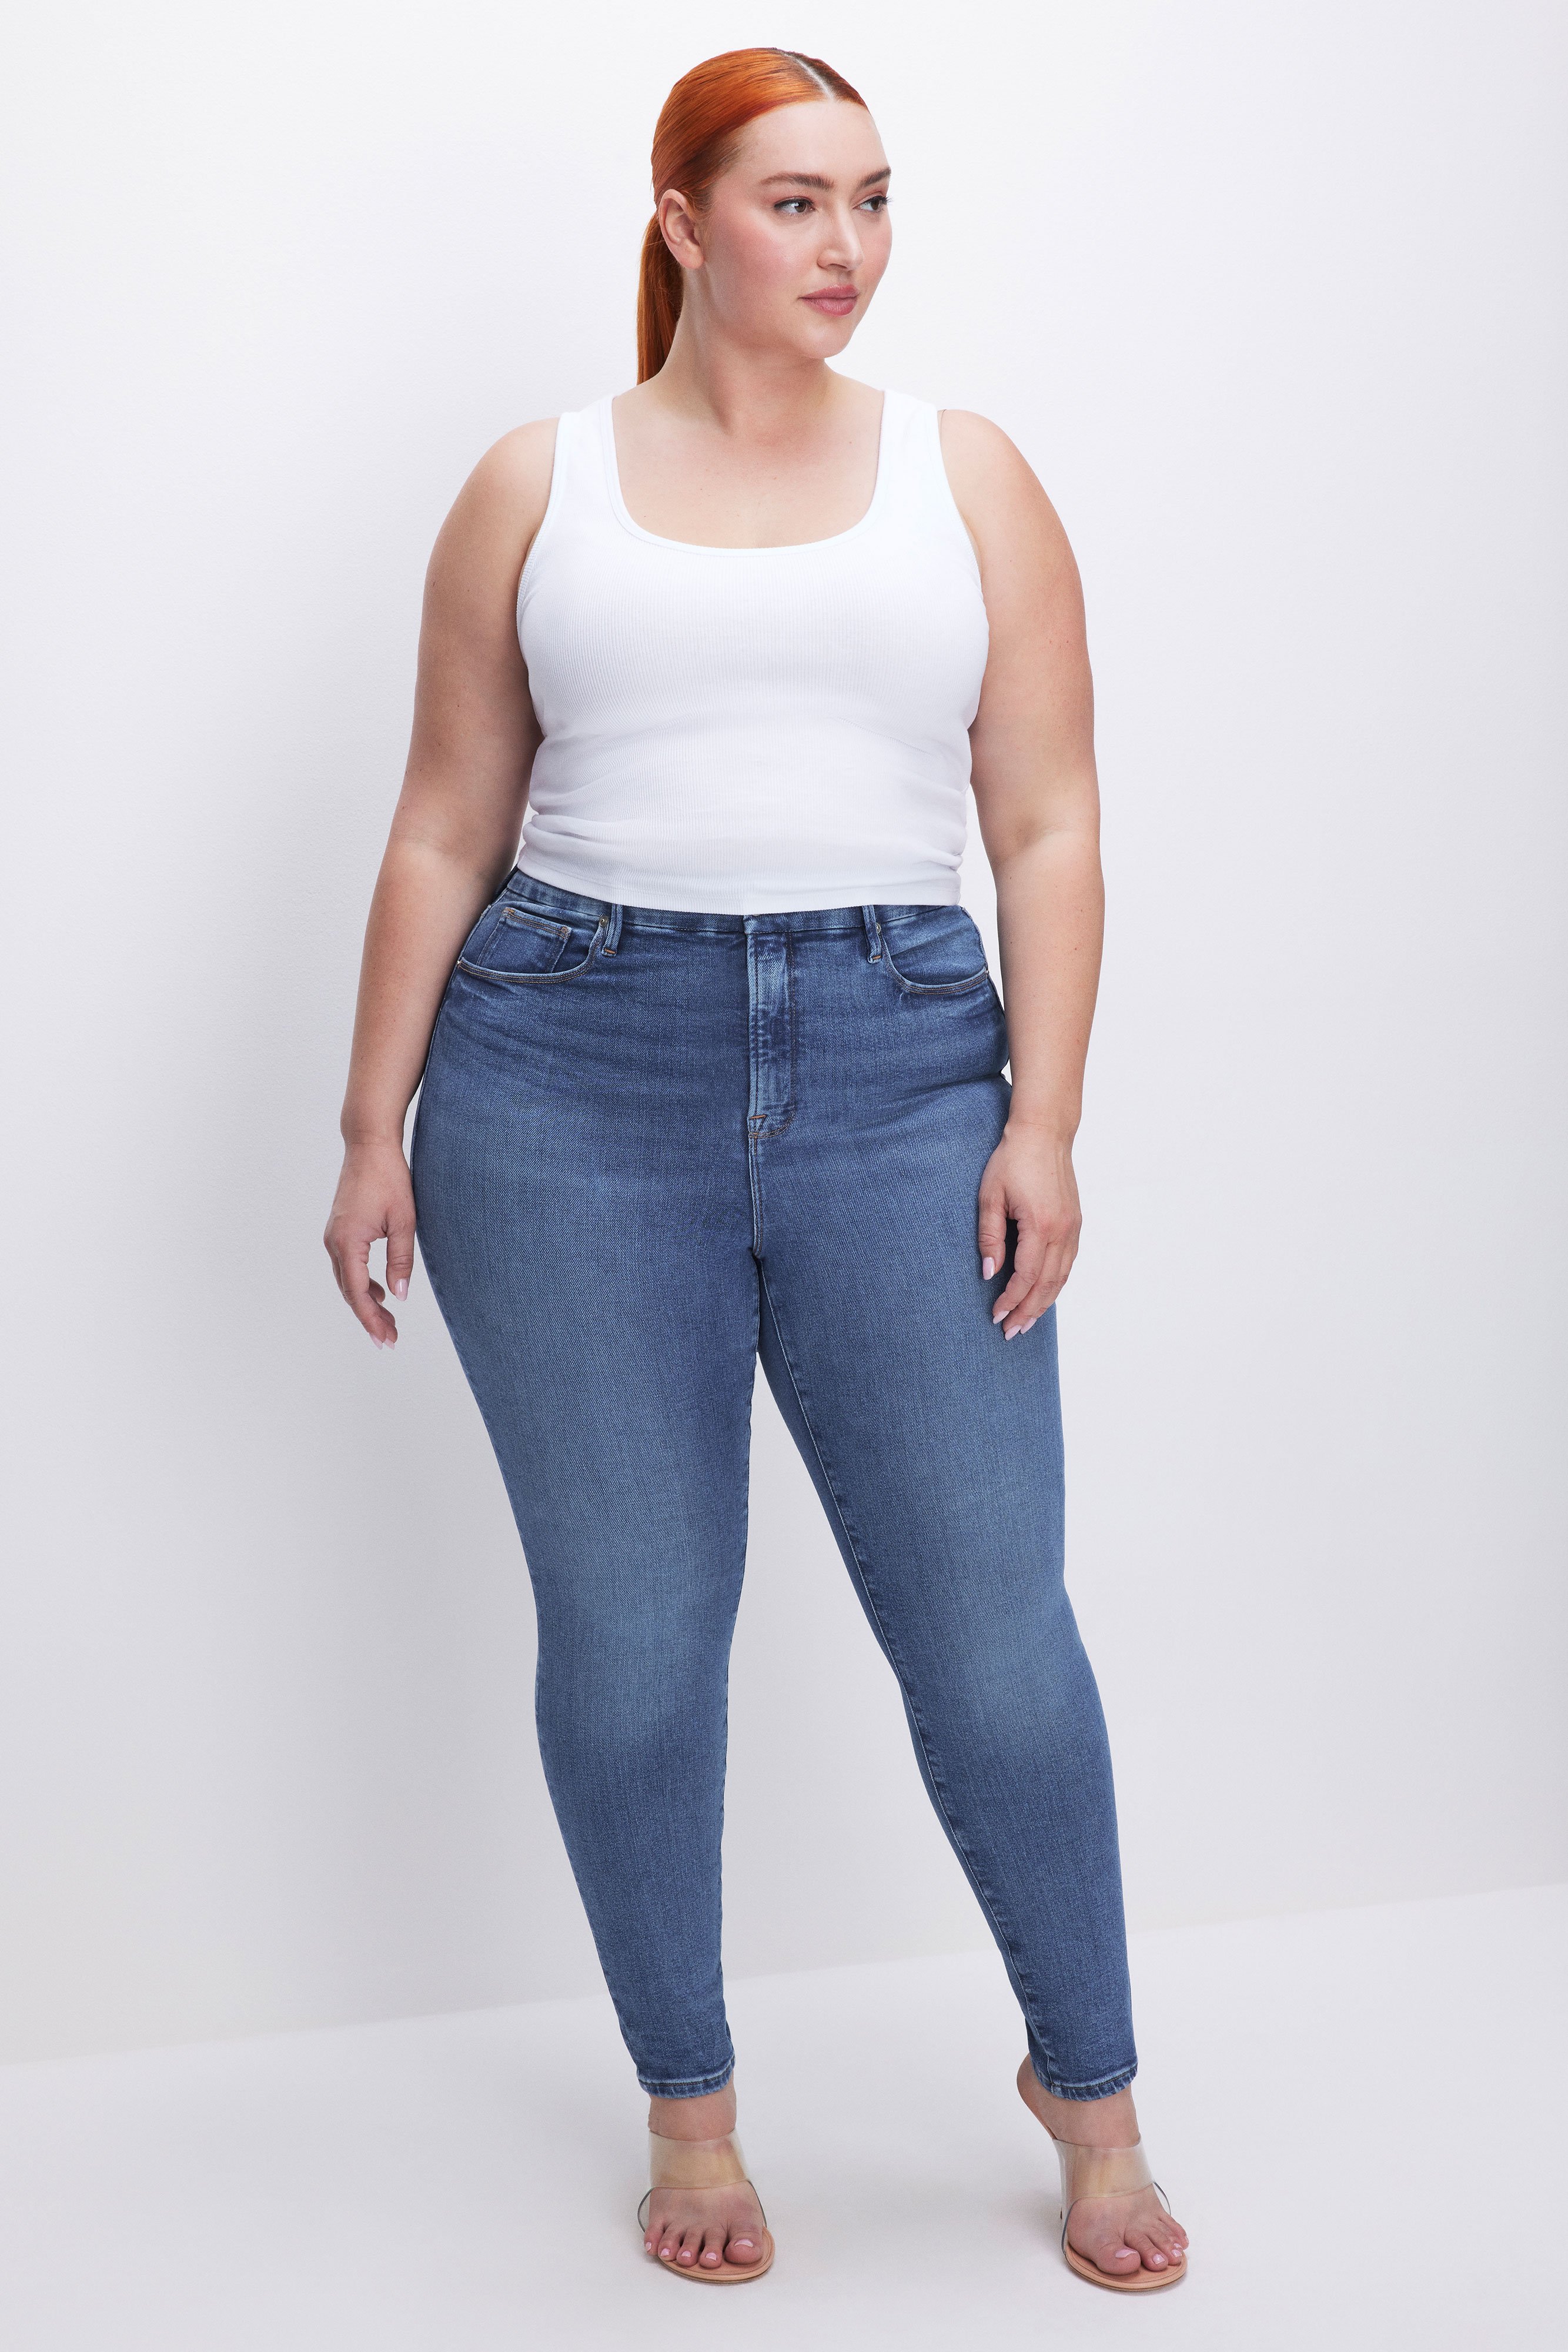 Styled with GOOD LEGS SKINNY LIGHT COMPRESSION JEANS | INDIGO268